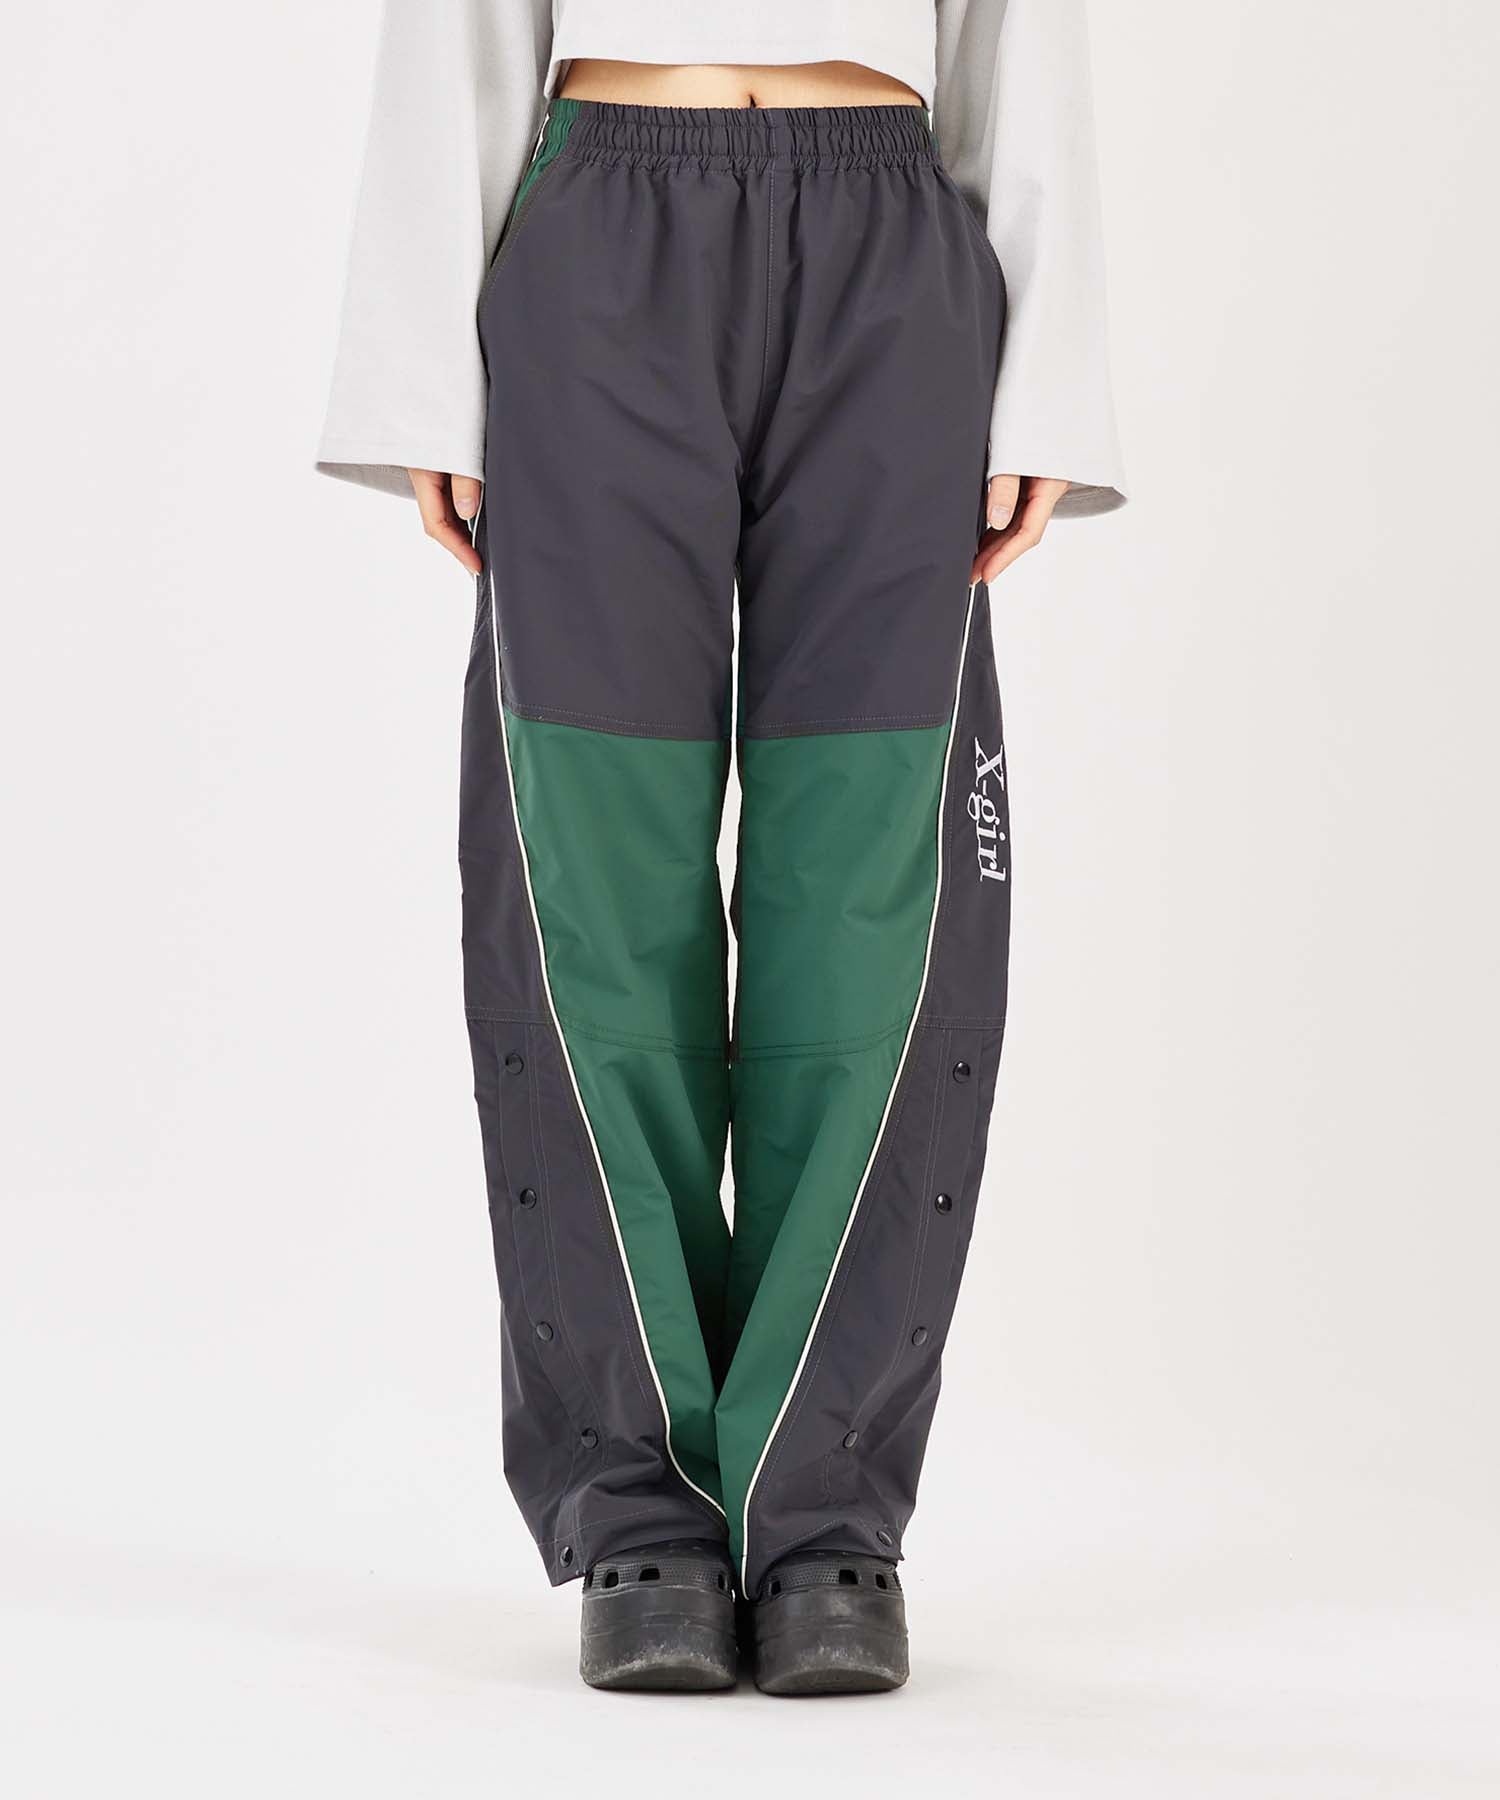 Shop Girls 1-7 Track Pants Online and in Store - Kmart NZ